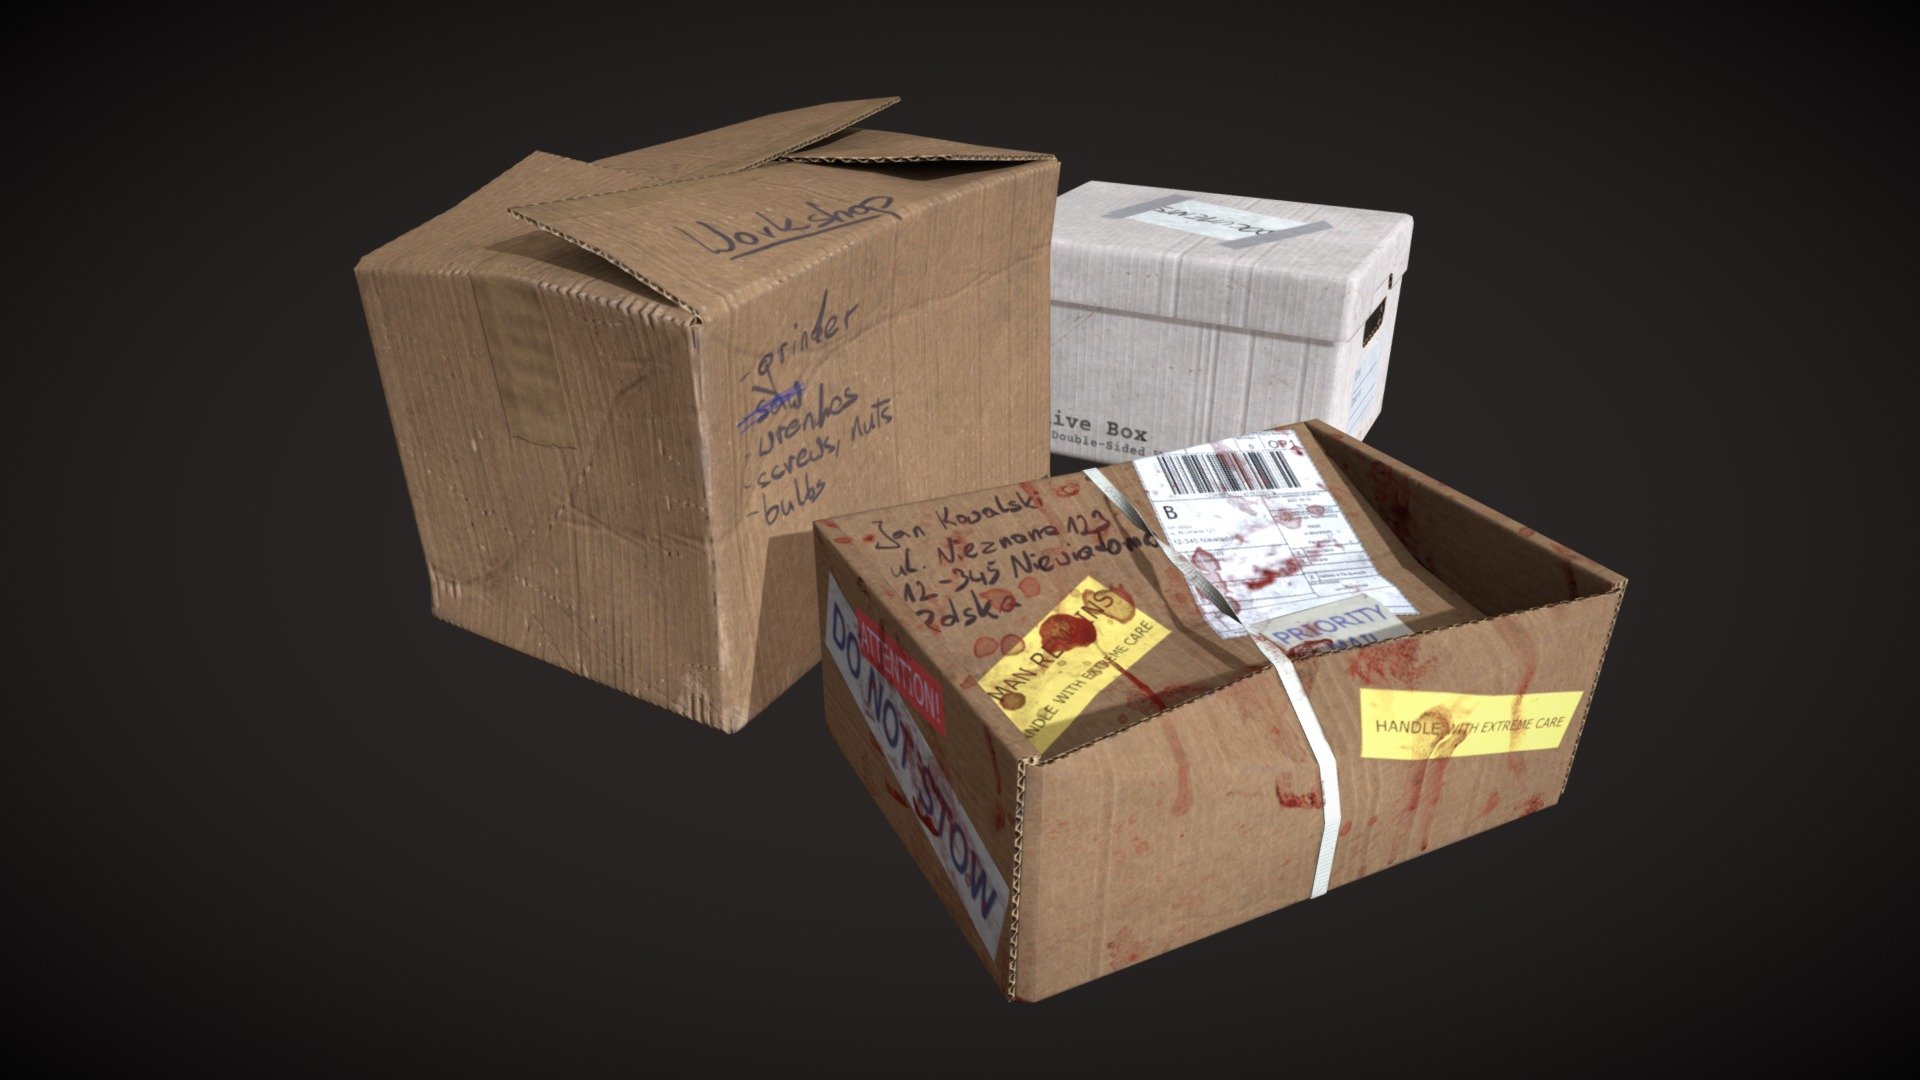 Old boxes made for an art-test.
Made in blender and textured in substance painter.
1k textures
906 verts - Boxes - 3D model by Rafał (@rafal.gawenda) 3d model